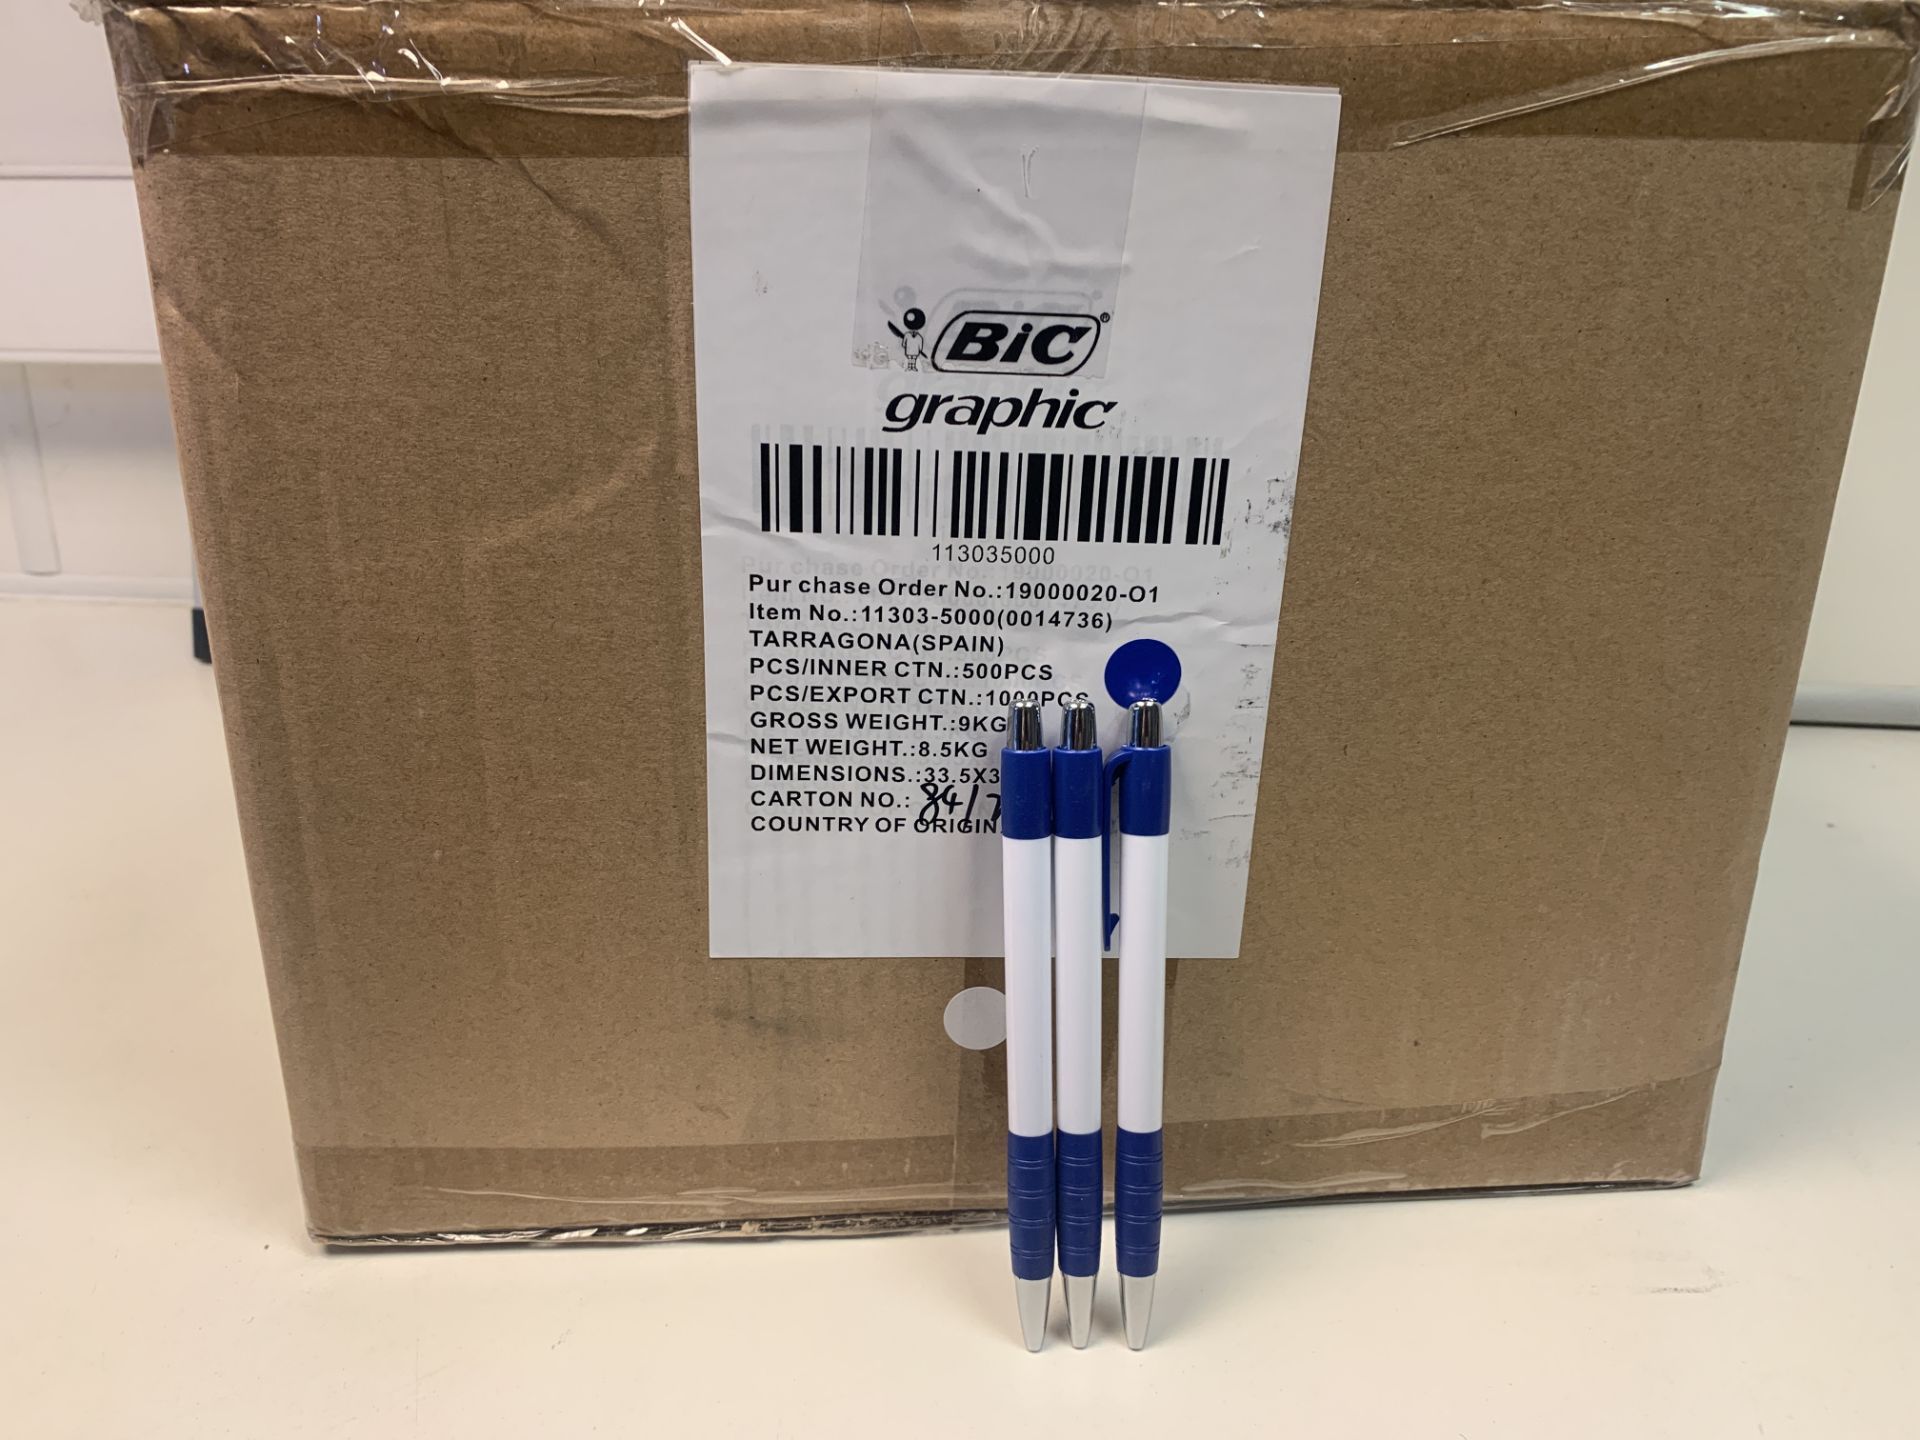 1000 X BRAND NEW BIC GRAPHIC STYLUS PENS (PLEASE NOTE THESE ARE BIC MADE PENS NOT BRANDED AS BIC FOR